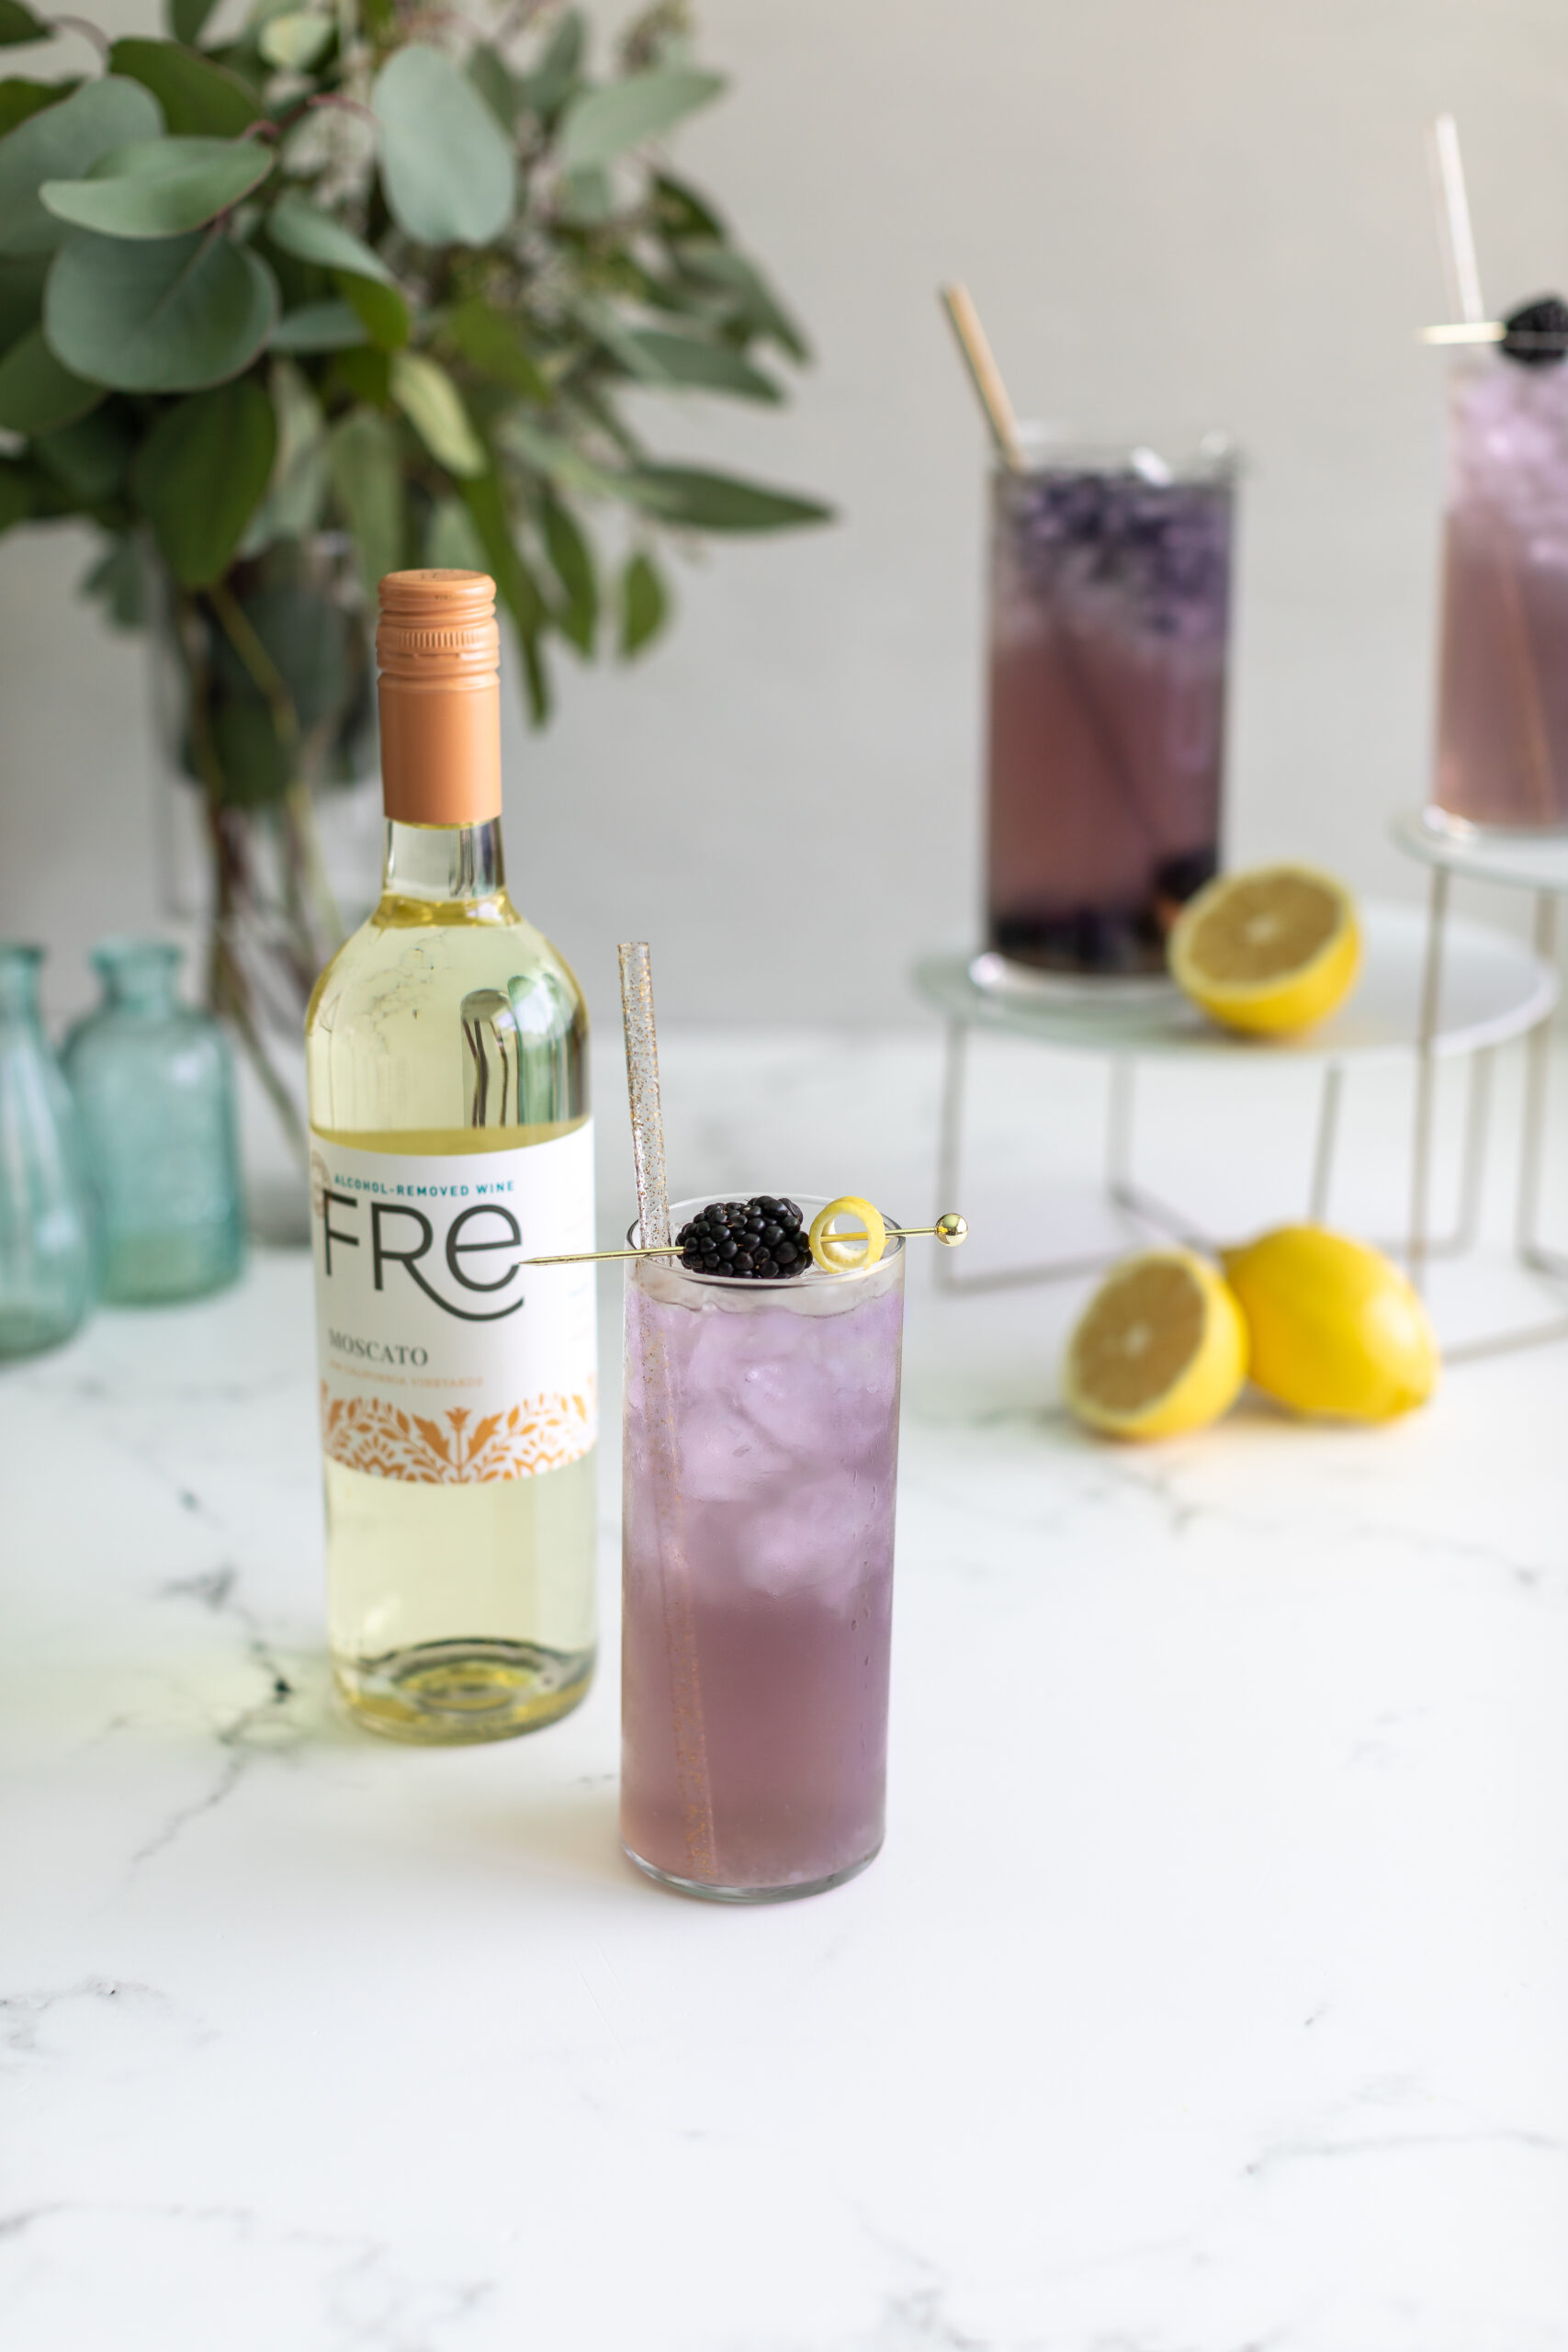 fre wines, fre wine, alcohol removed wine, alcohol free wine, mocktail, mocktails, wine cocktail, moscato, alcohol free moscato, alcohol removed moscato